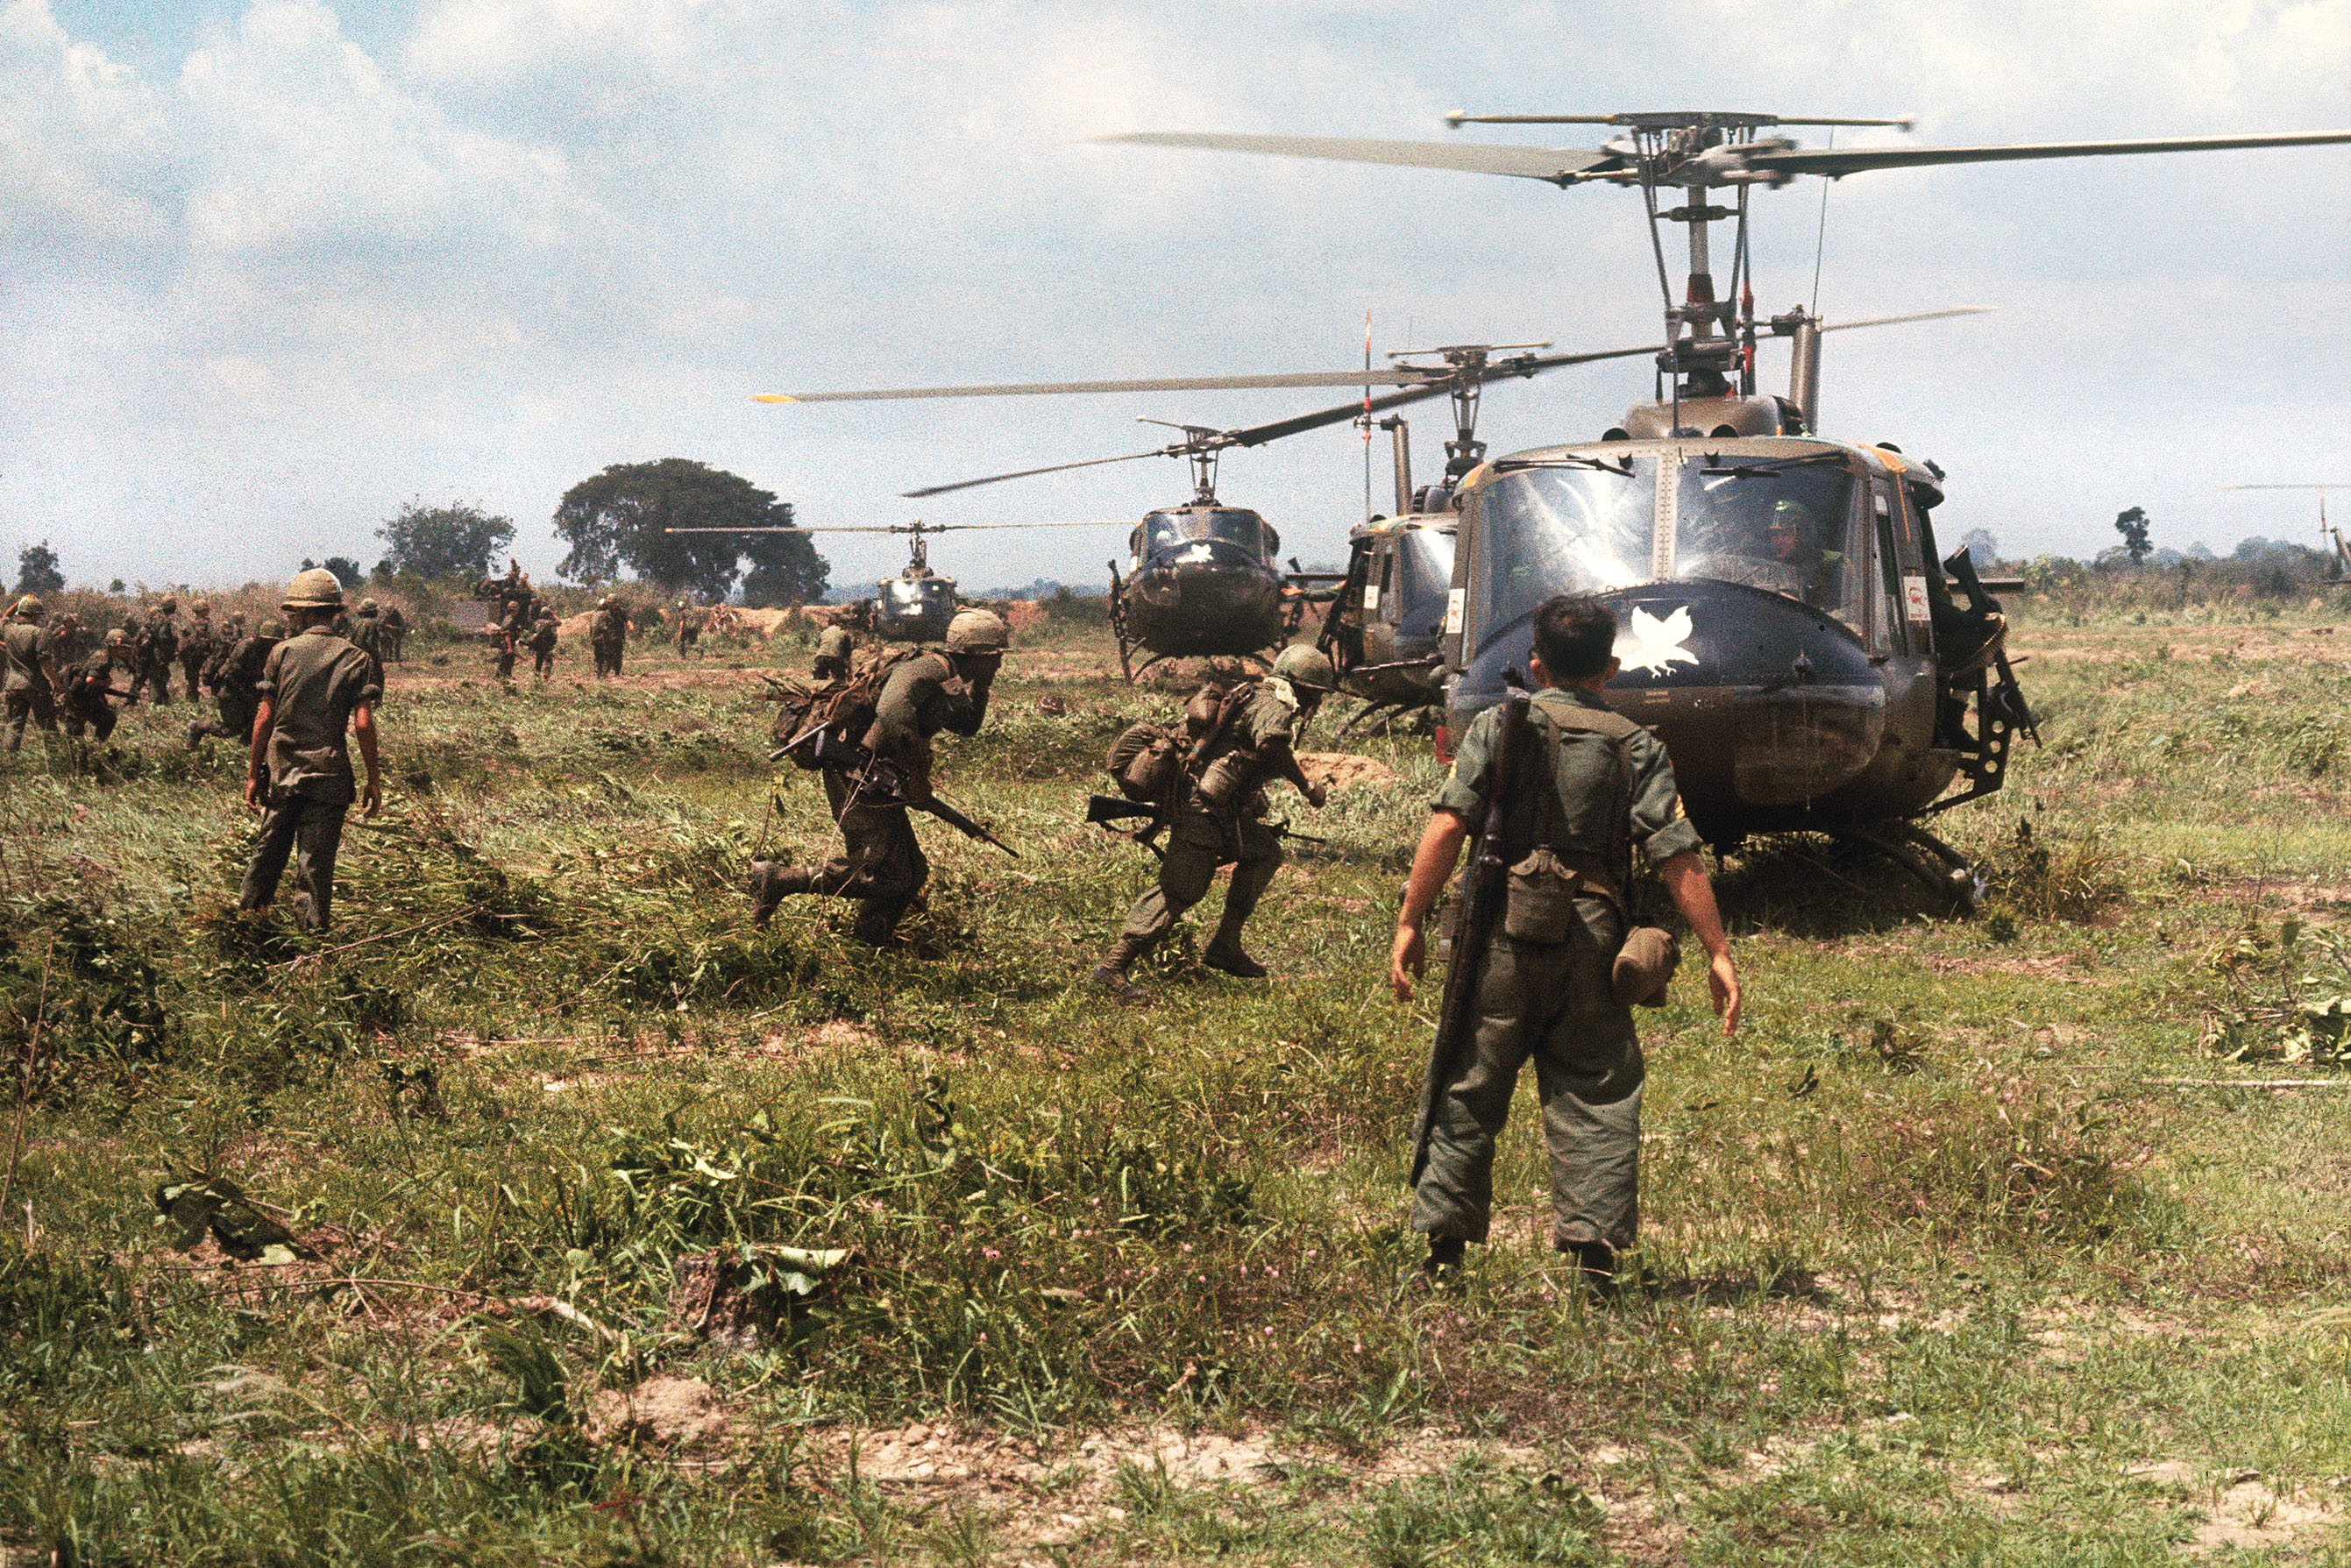 U.S. troops head for their helicopters, as did companies A,B,C and D of the 1st Battalion, 12th Cavalry, when ordered to helicopter pickup zones the afternoon of Dec. 17, 1966, after another unit of the 1st Cavalry Division ran into a large force of the North Vietnamese Army. / Bettman/Getty Images